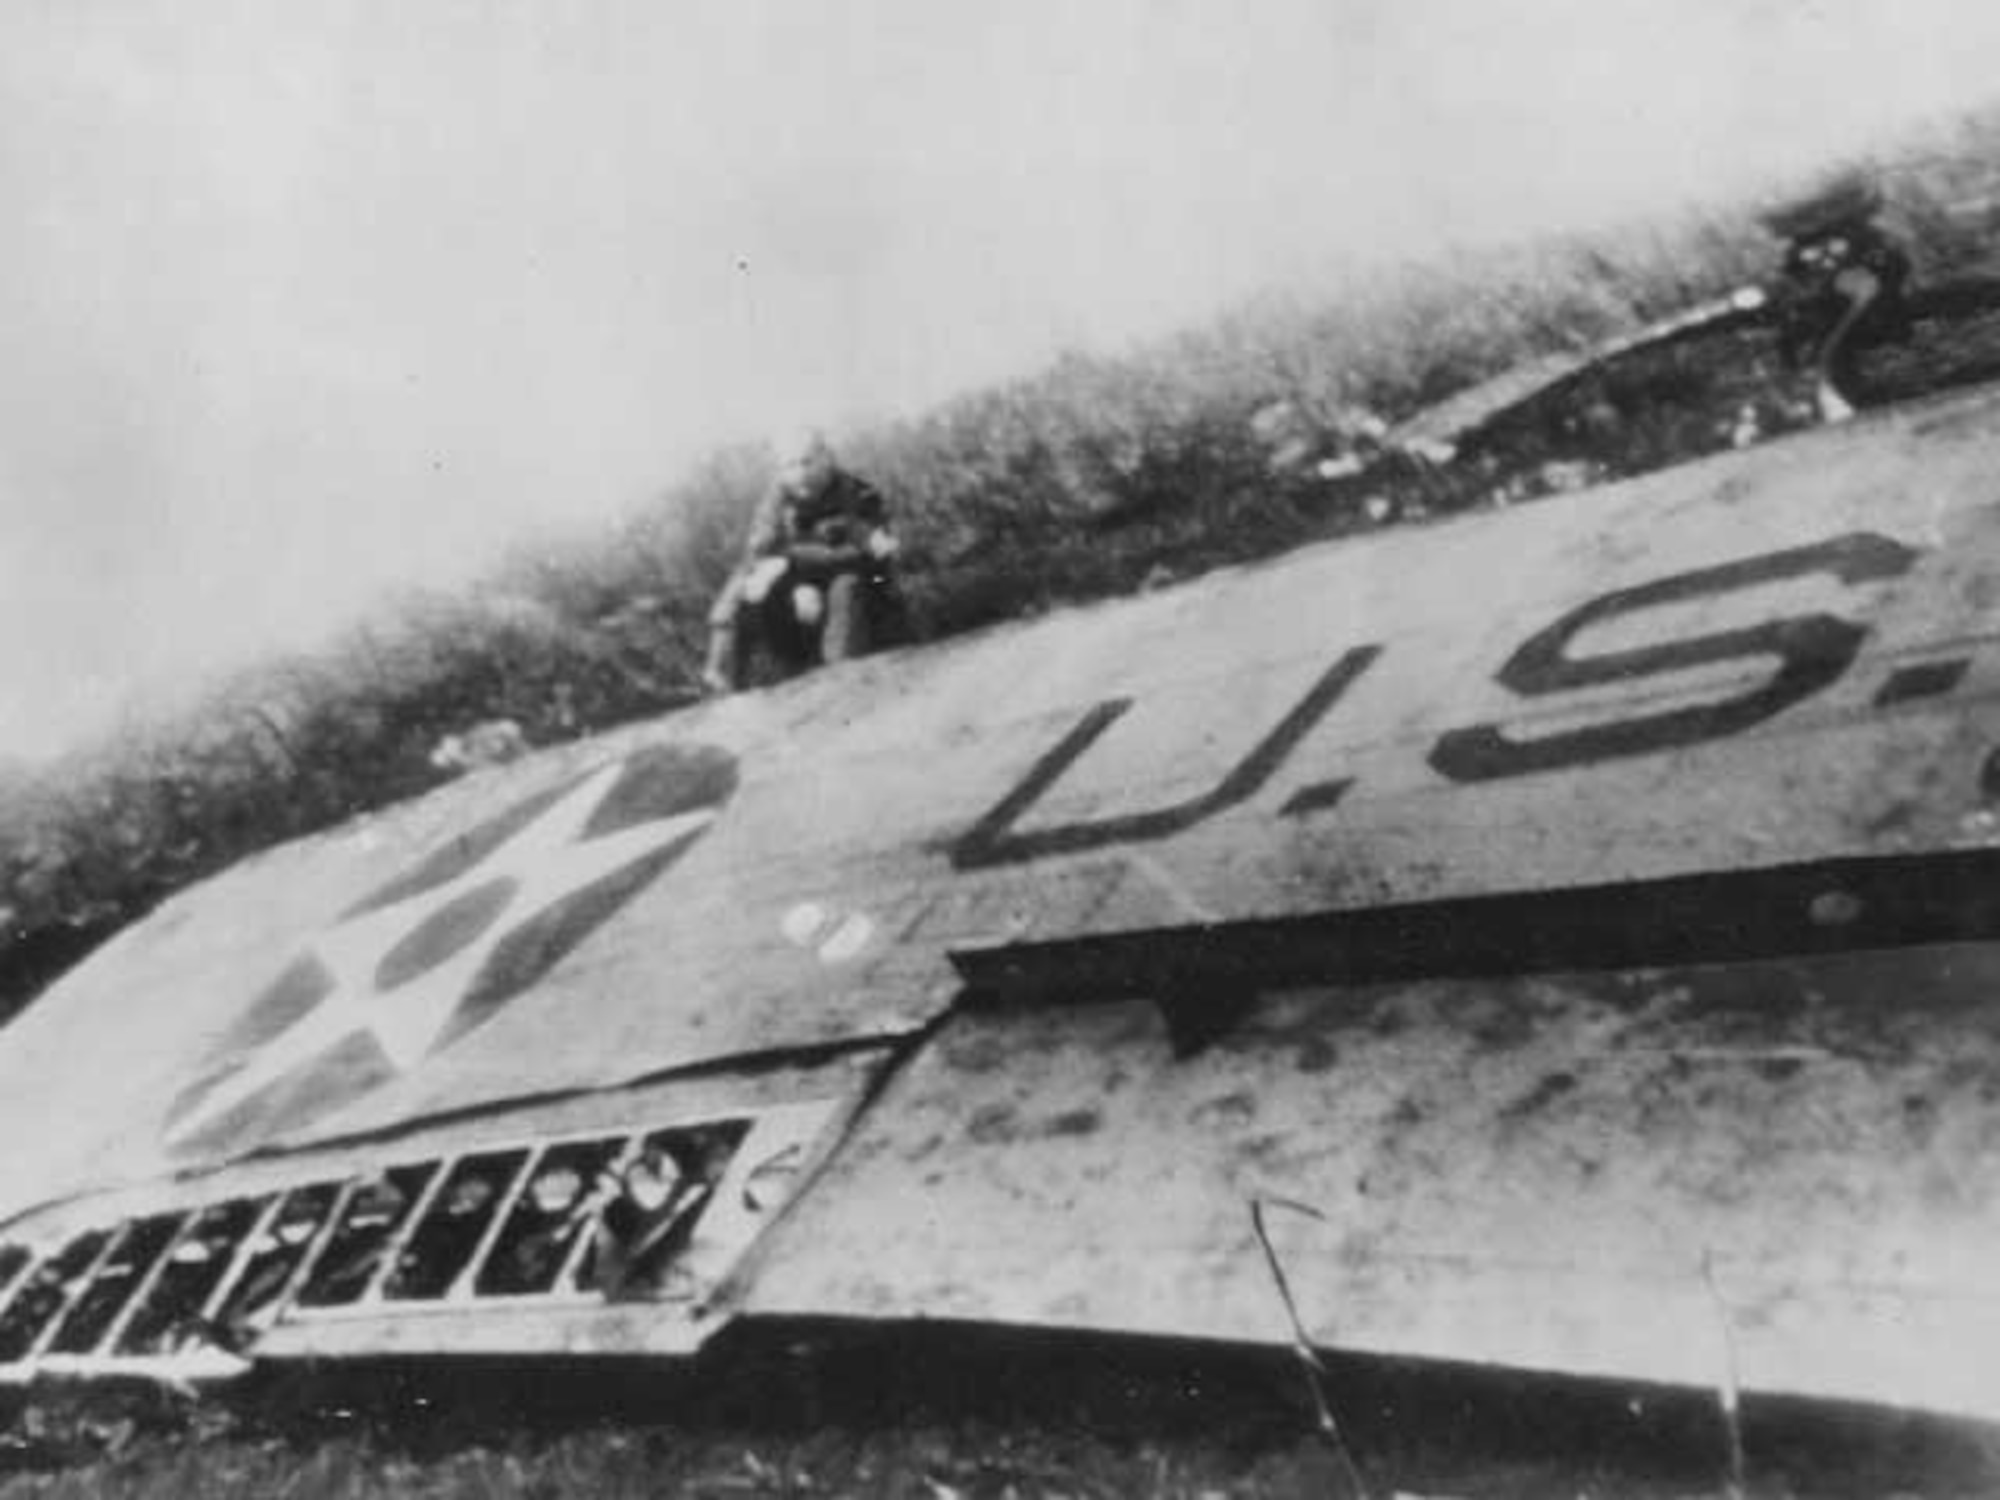 Wreckage of Major General Doolittle’s plane in China after the raid on Tokyo, April 18, 1942. Doolittle at the end of the Tokyo raid. Major General Doolittle sits by a wing of his crashed plane somewhere in China after he led the daring US air raid on Tokyo. Heading for a China airfield after the raid, several of the planes ran out of gas and crashed. (National Archives, US Navy 80-G-063587).